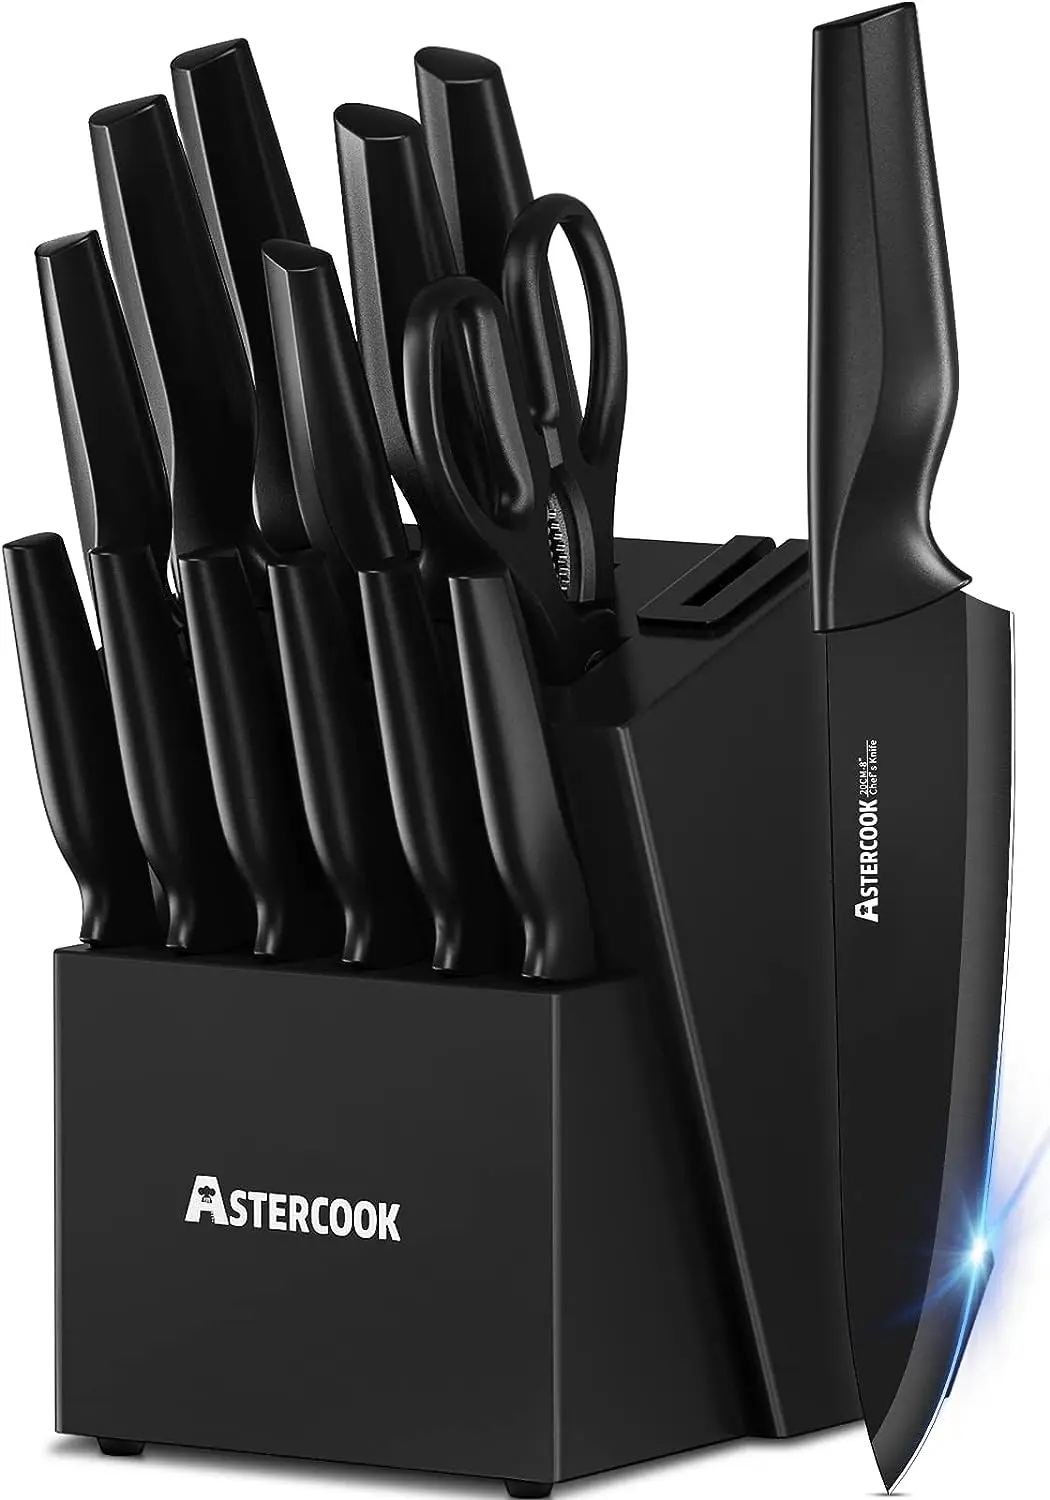 Safe, 15 Pieces German Stainless Steel Knife Block Set, Black A